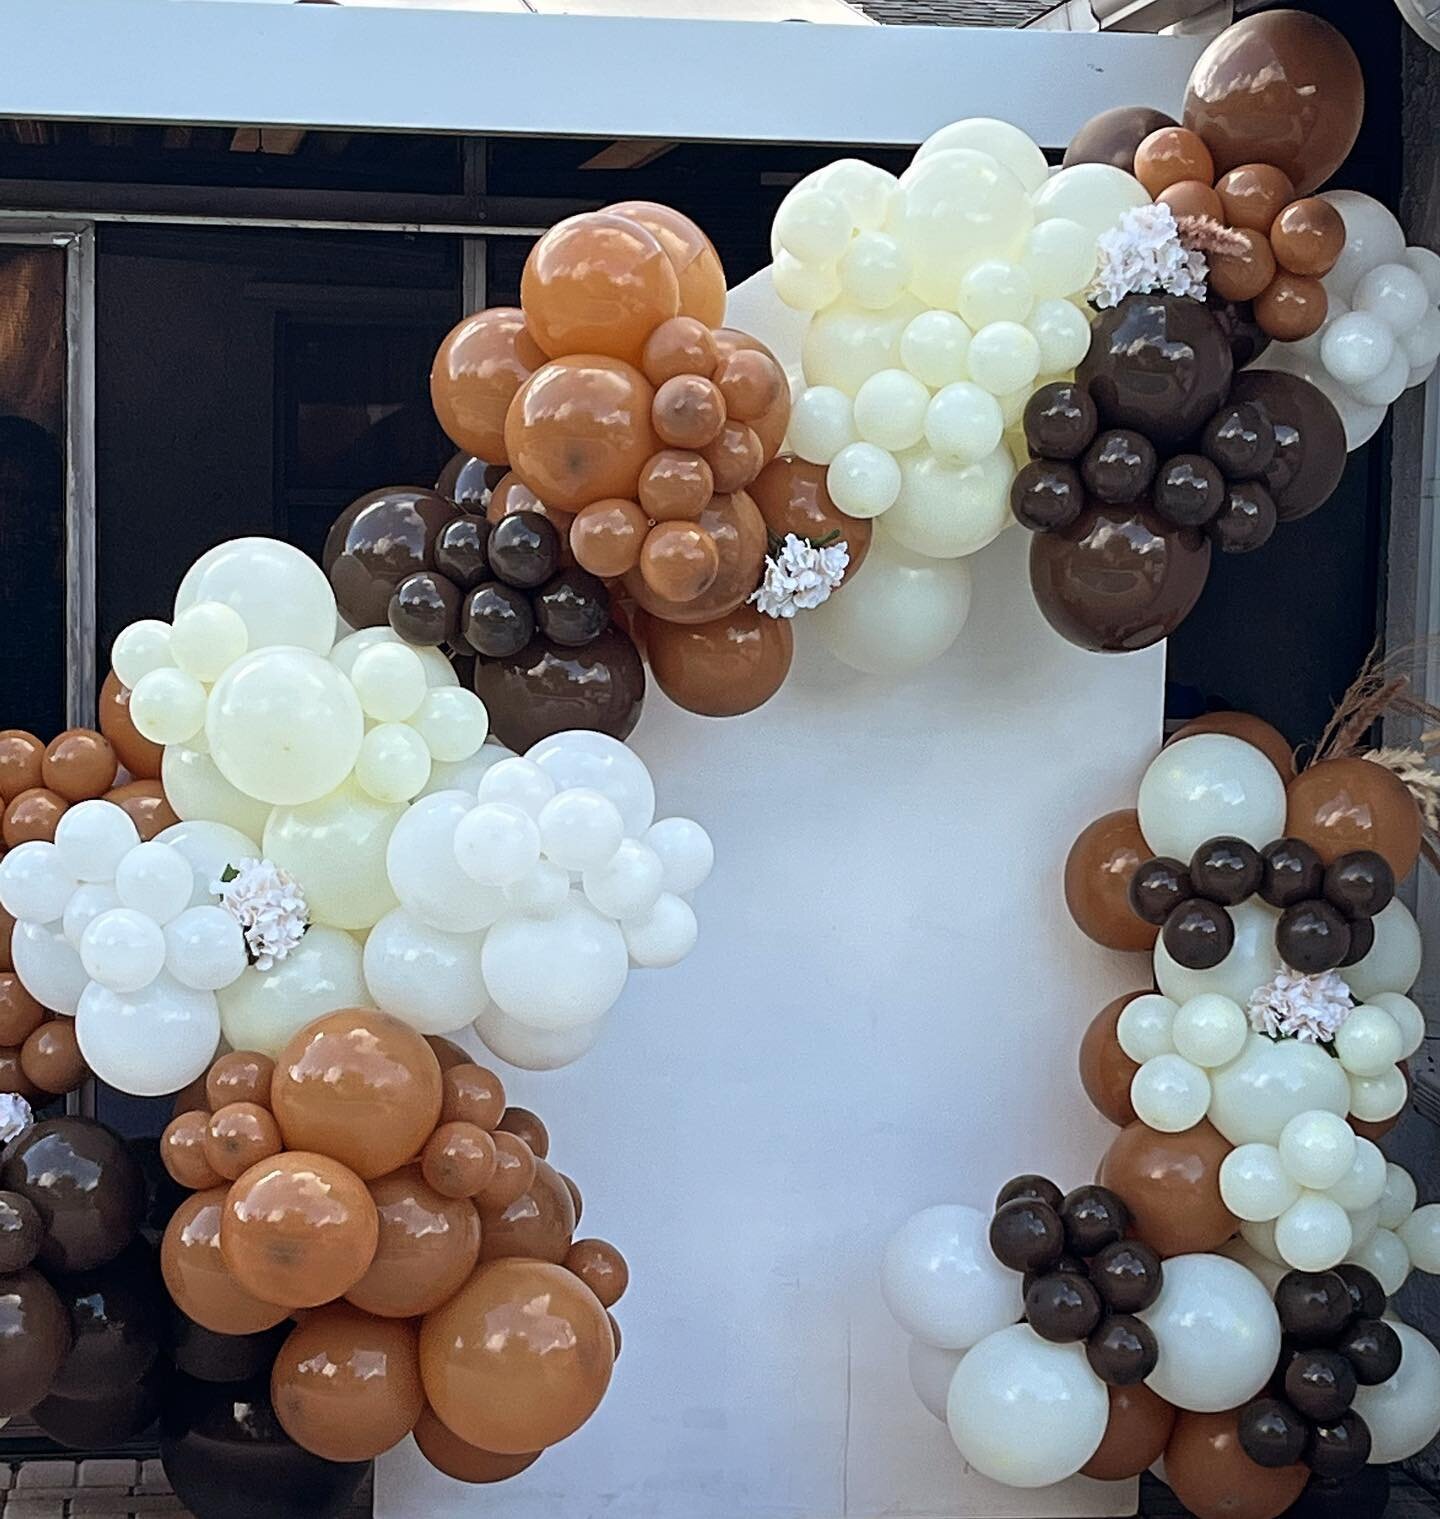 Add a touch of warmth and sophistication for your next celebration with shades of brown 🌰🍂 
&bull;
&bull;
&bull;
#shadesofmelanin #browncelebration #BalloonArtistry #EarthyElegance #eventdecor #EventDesign #browardevents #partyrentals #balloondecor